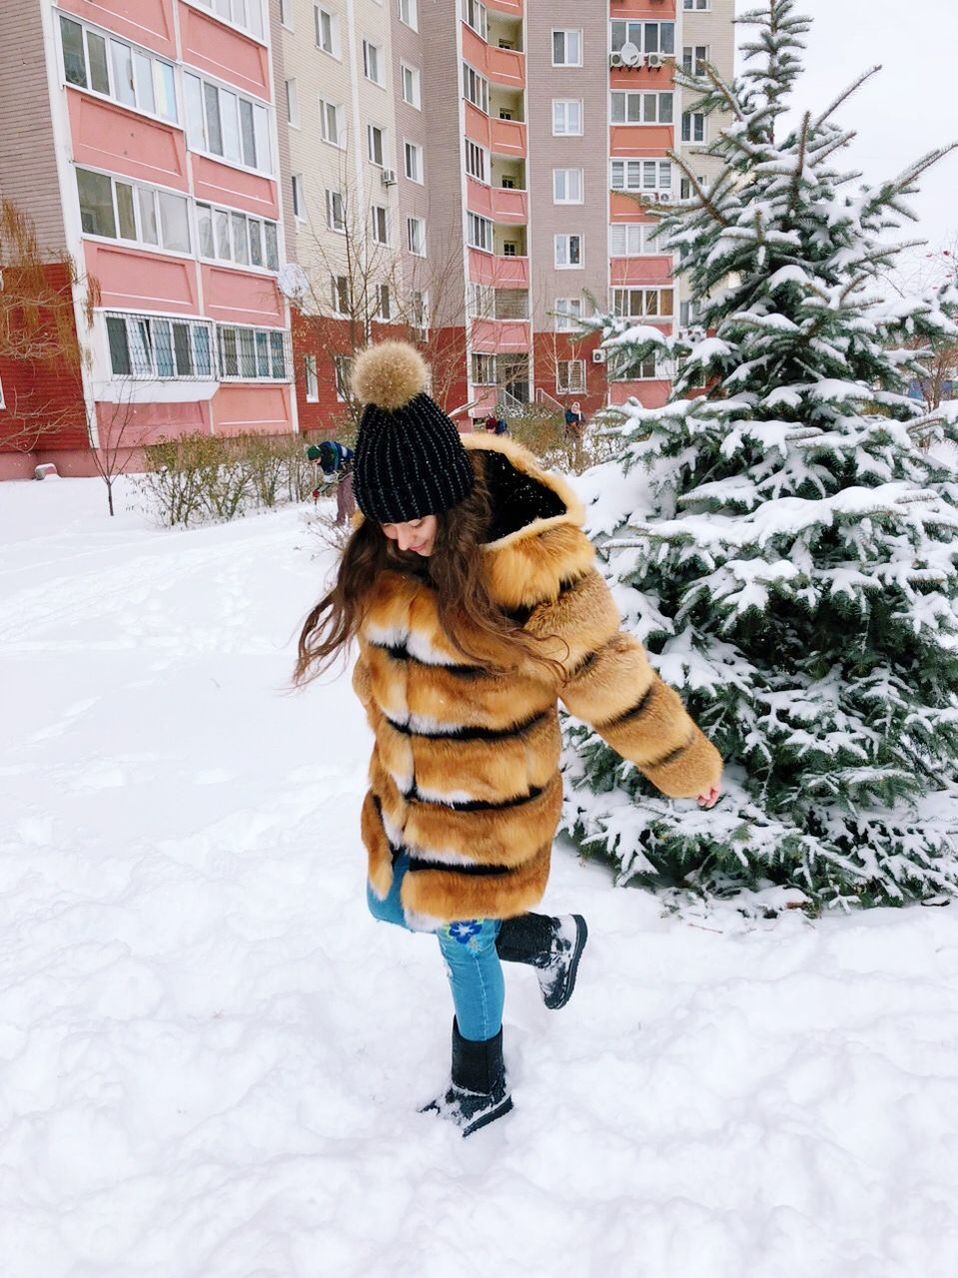 winter, snow, cold temperature, warm clothing, full length, clothing, building exterior, one person, real people, built structure, lifestyles, architecture, nature, leisure activity, day, women, childhood, child, snowing, extreme weather